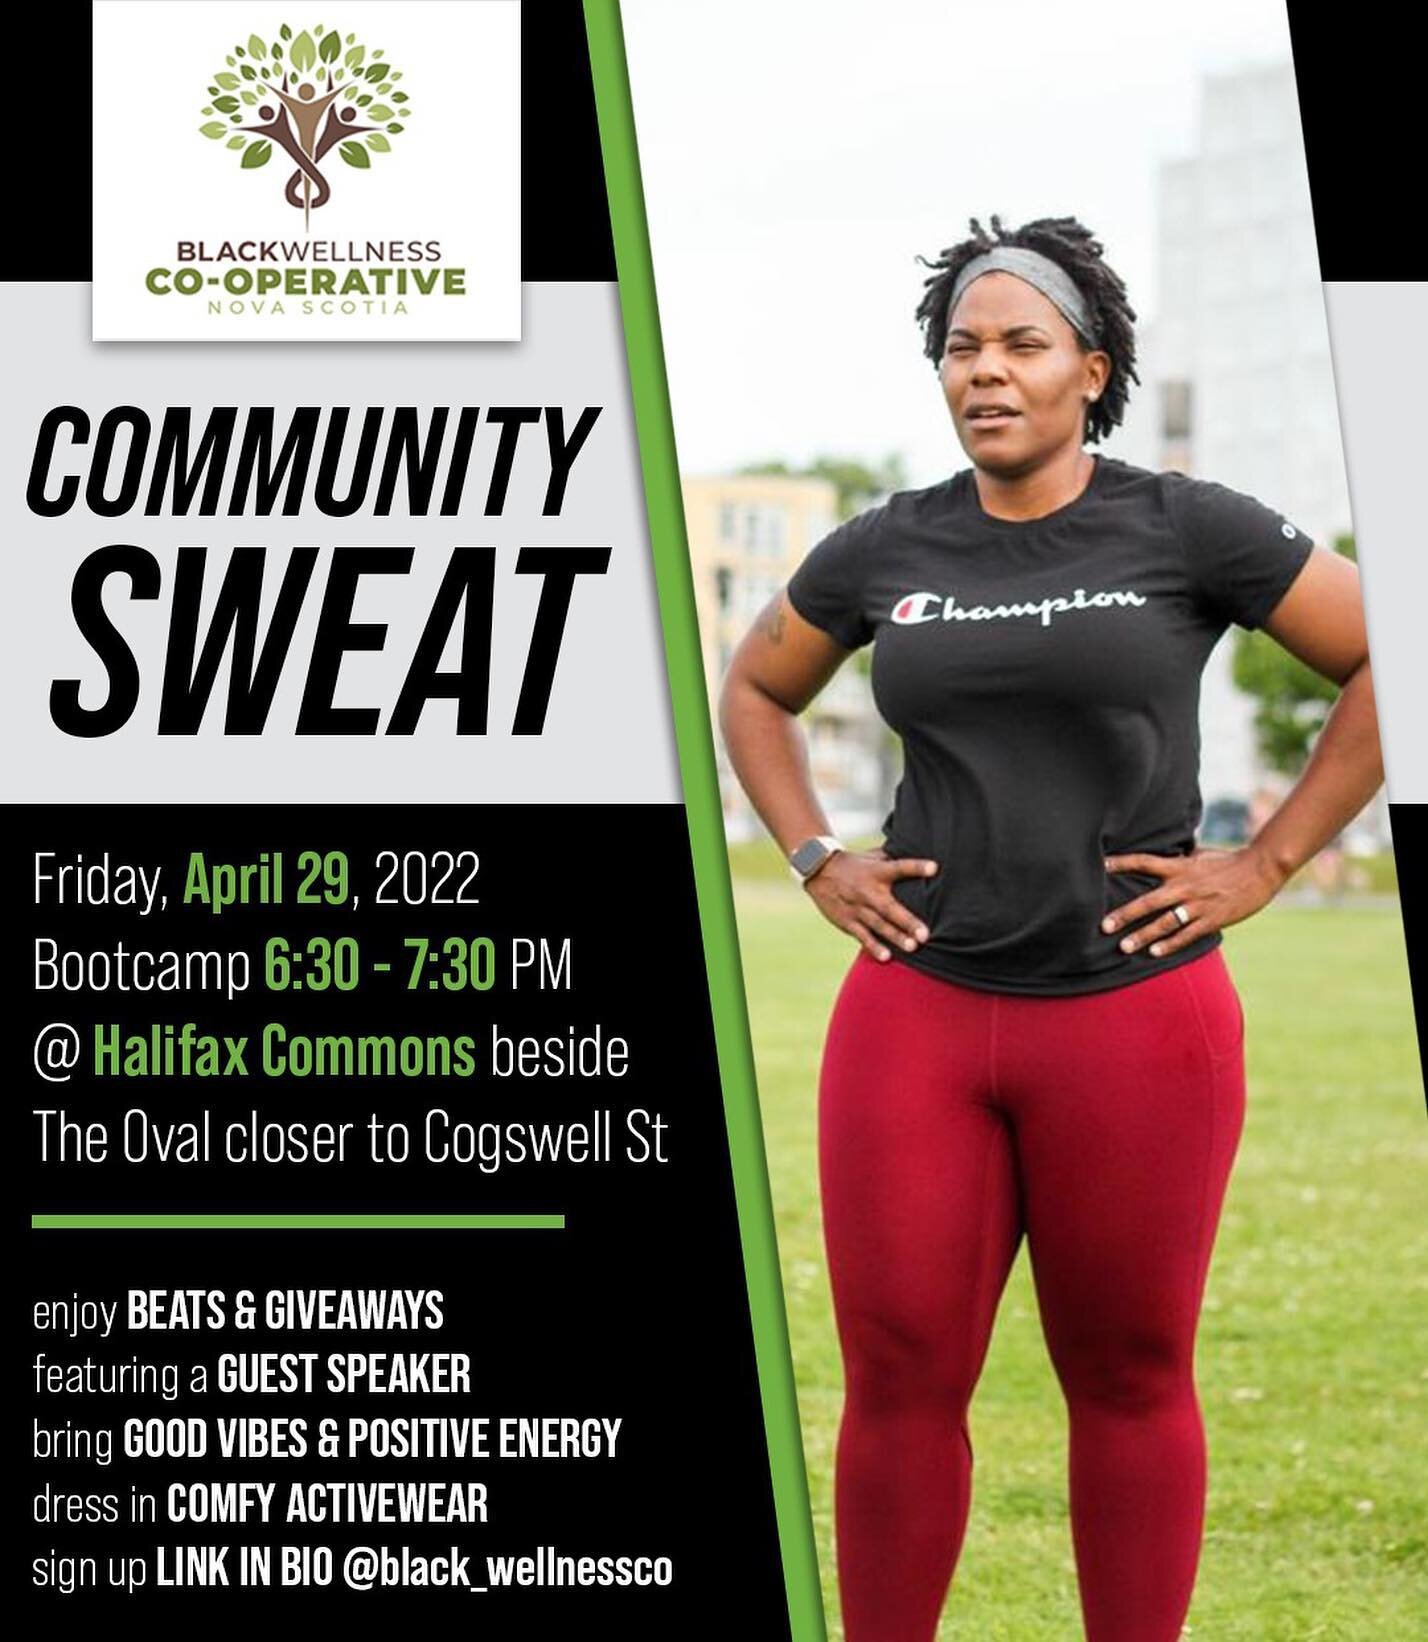 Huge news 🚨 Now that the sun is shinning &amp; the temp is in the positives, The BWC is back outside with another outdoor bootcamp event‼️

This Friday, April 29th @ 6:30-7:30pm 🔙🔛🔝 

Location: Halifax commons

Beats by @djnuff268 ✔️
Guest speake